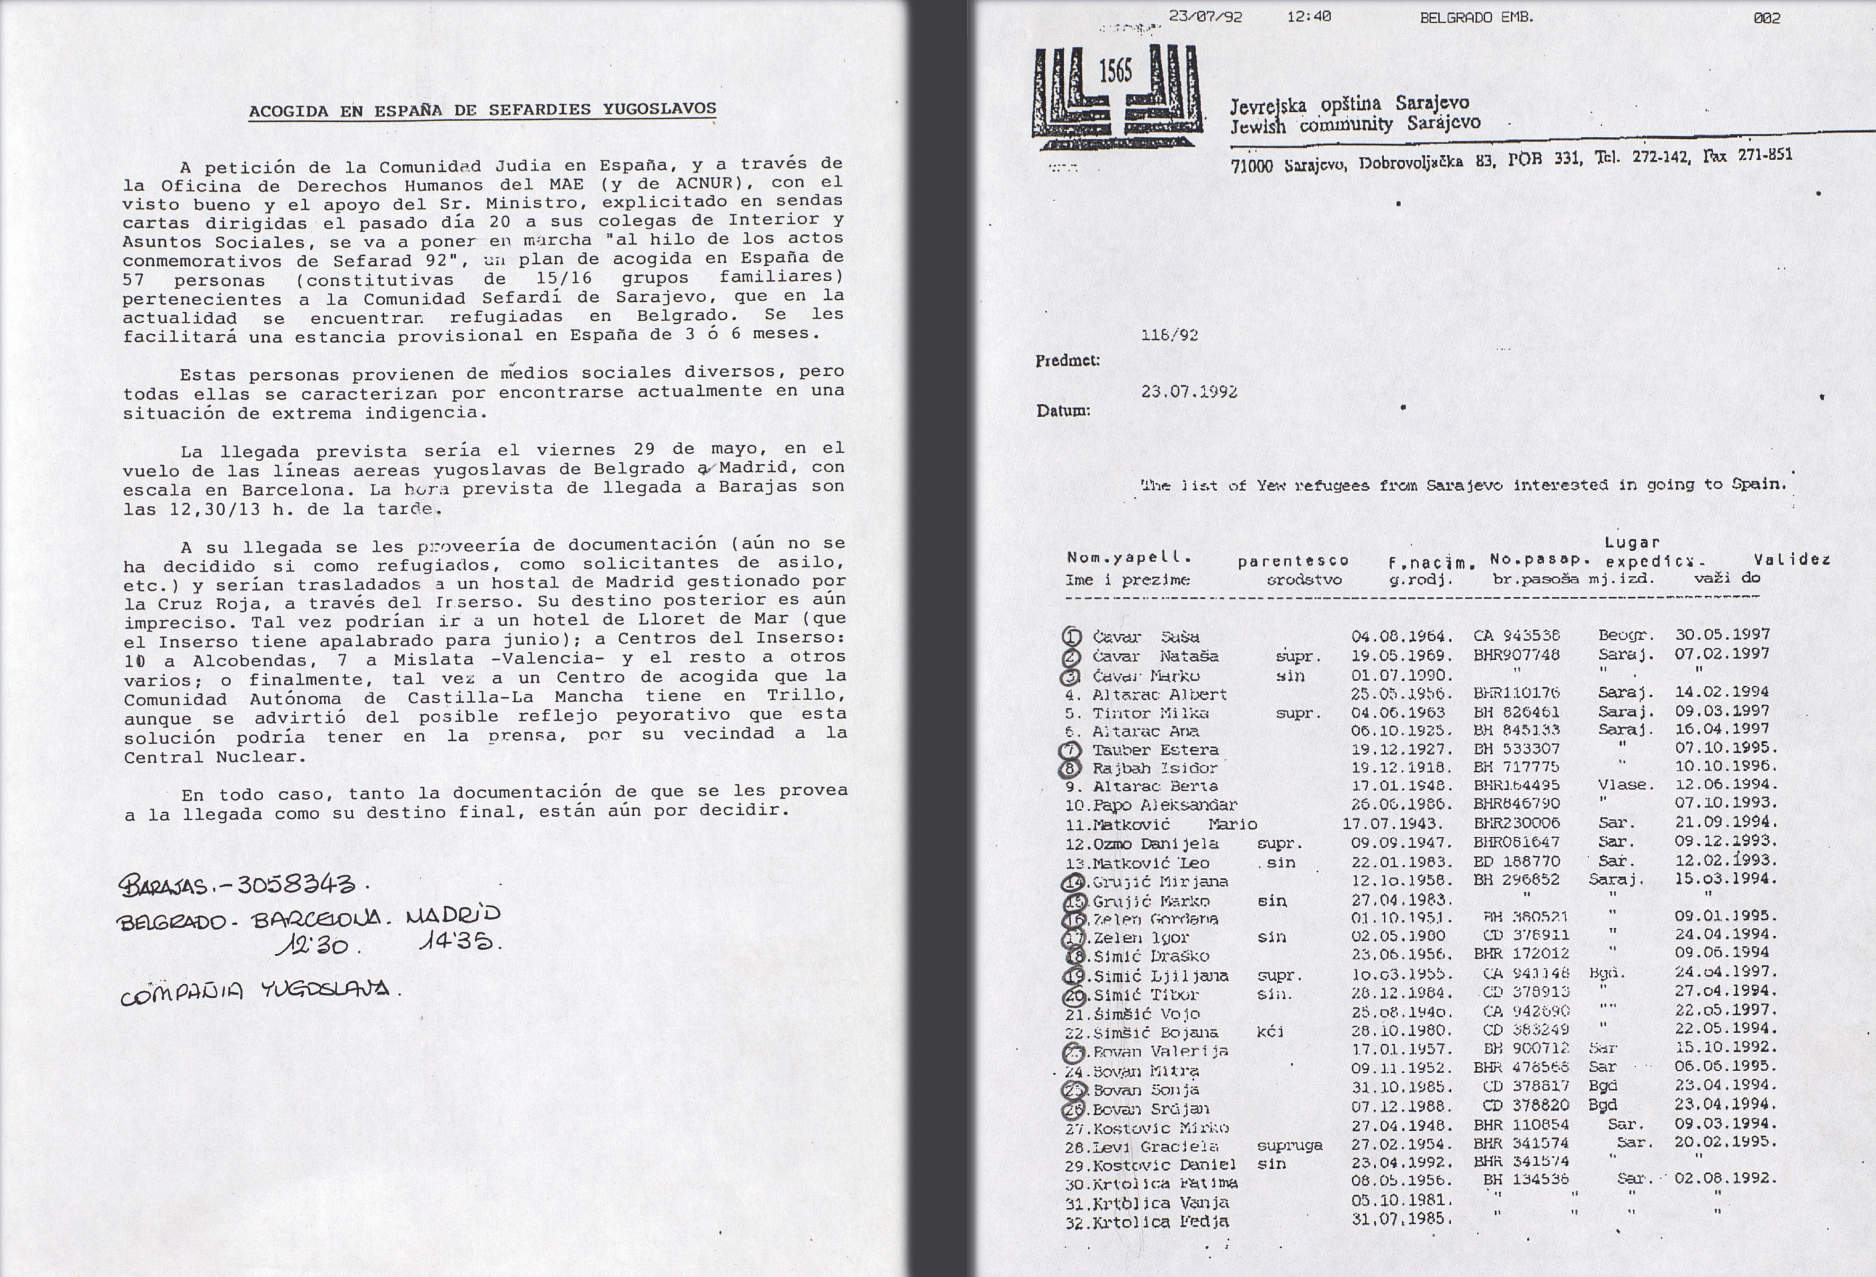 Report on the plan for protecting Sephardic Jews from Bosnia, as part of Sefarad' 92. Right, list of Sephardic Bosnians who benefited from the Spanish government's refugee programme, sent by the Jewish community of Sarajevo. 